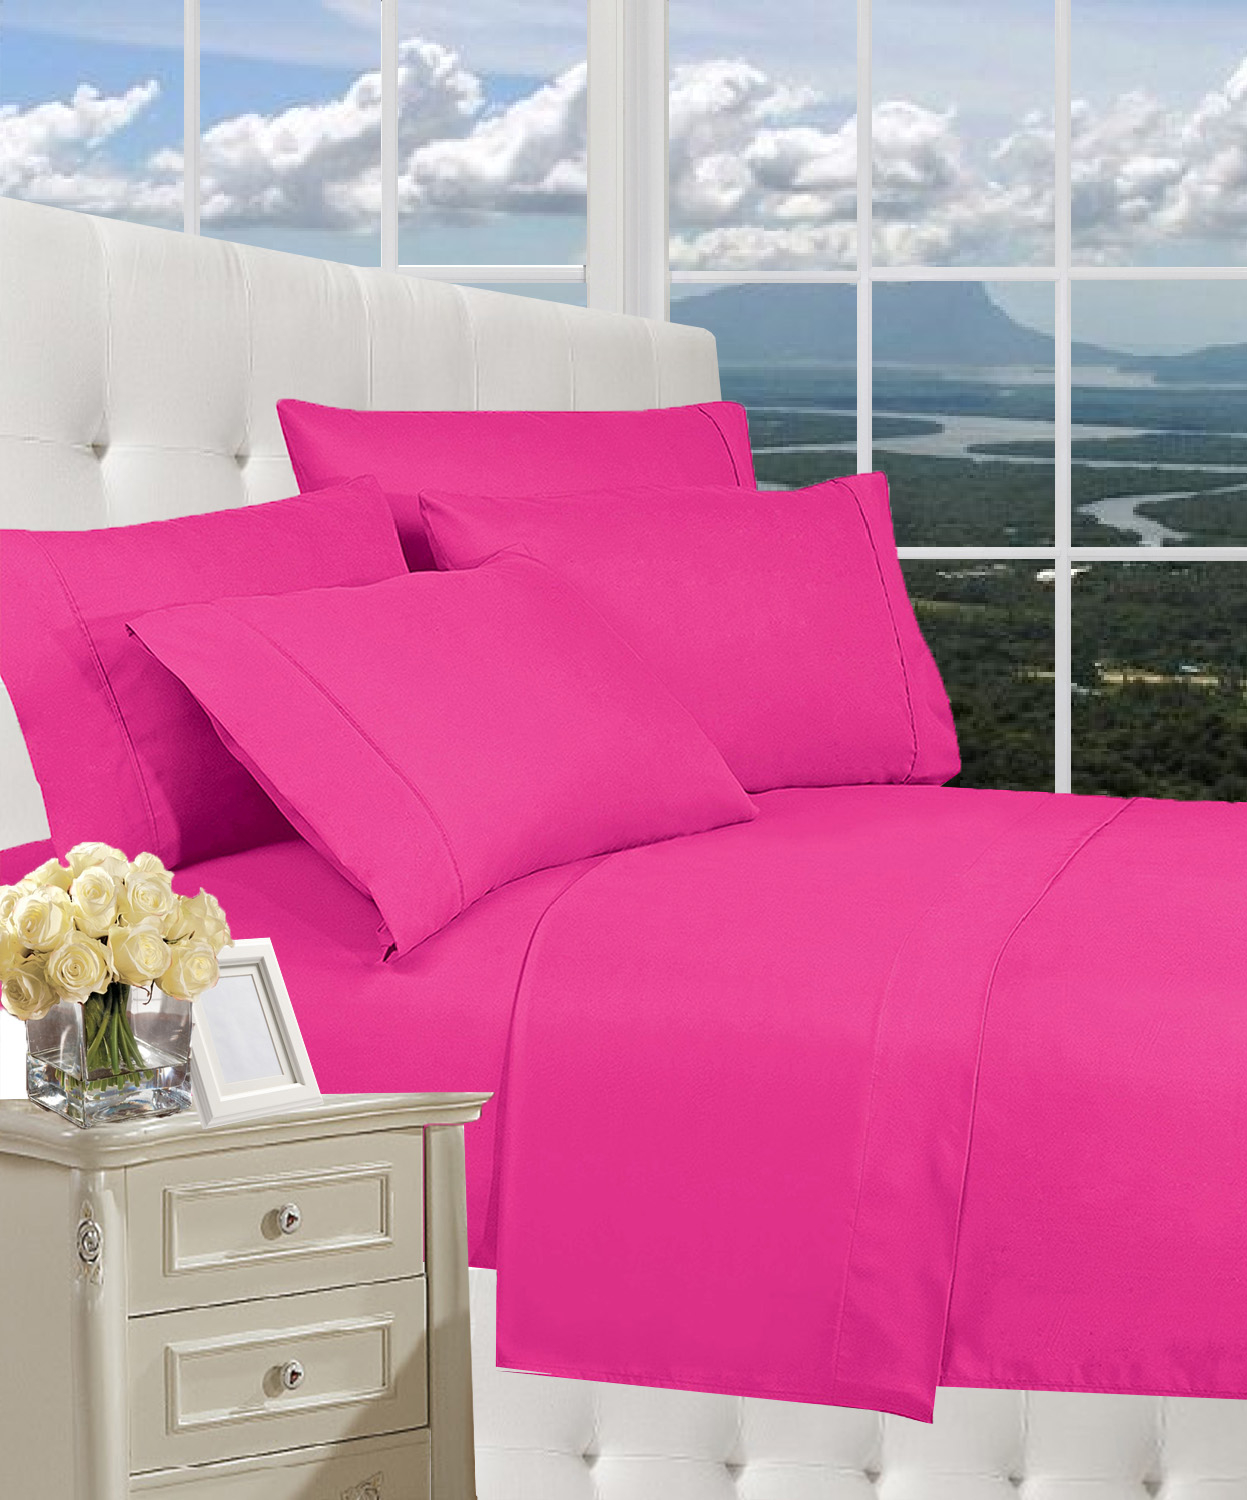 Elegant Comfort 1800 Series Wrinkle Resistant Egyptian Quality Hypoallergenic Ultra Soft Luxury 4-piece Bed Sheet Set, Full, Pink